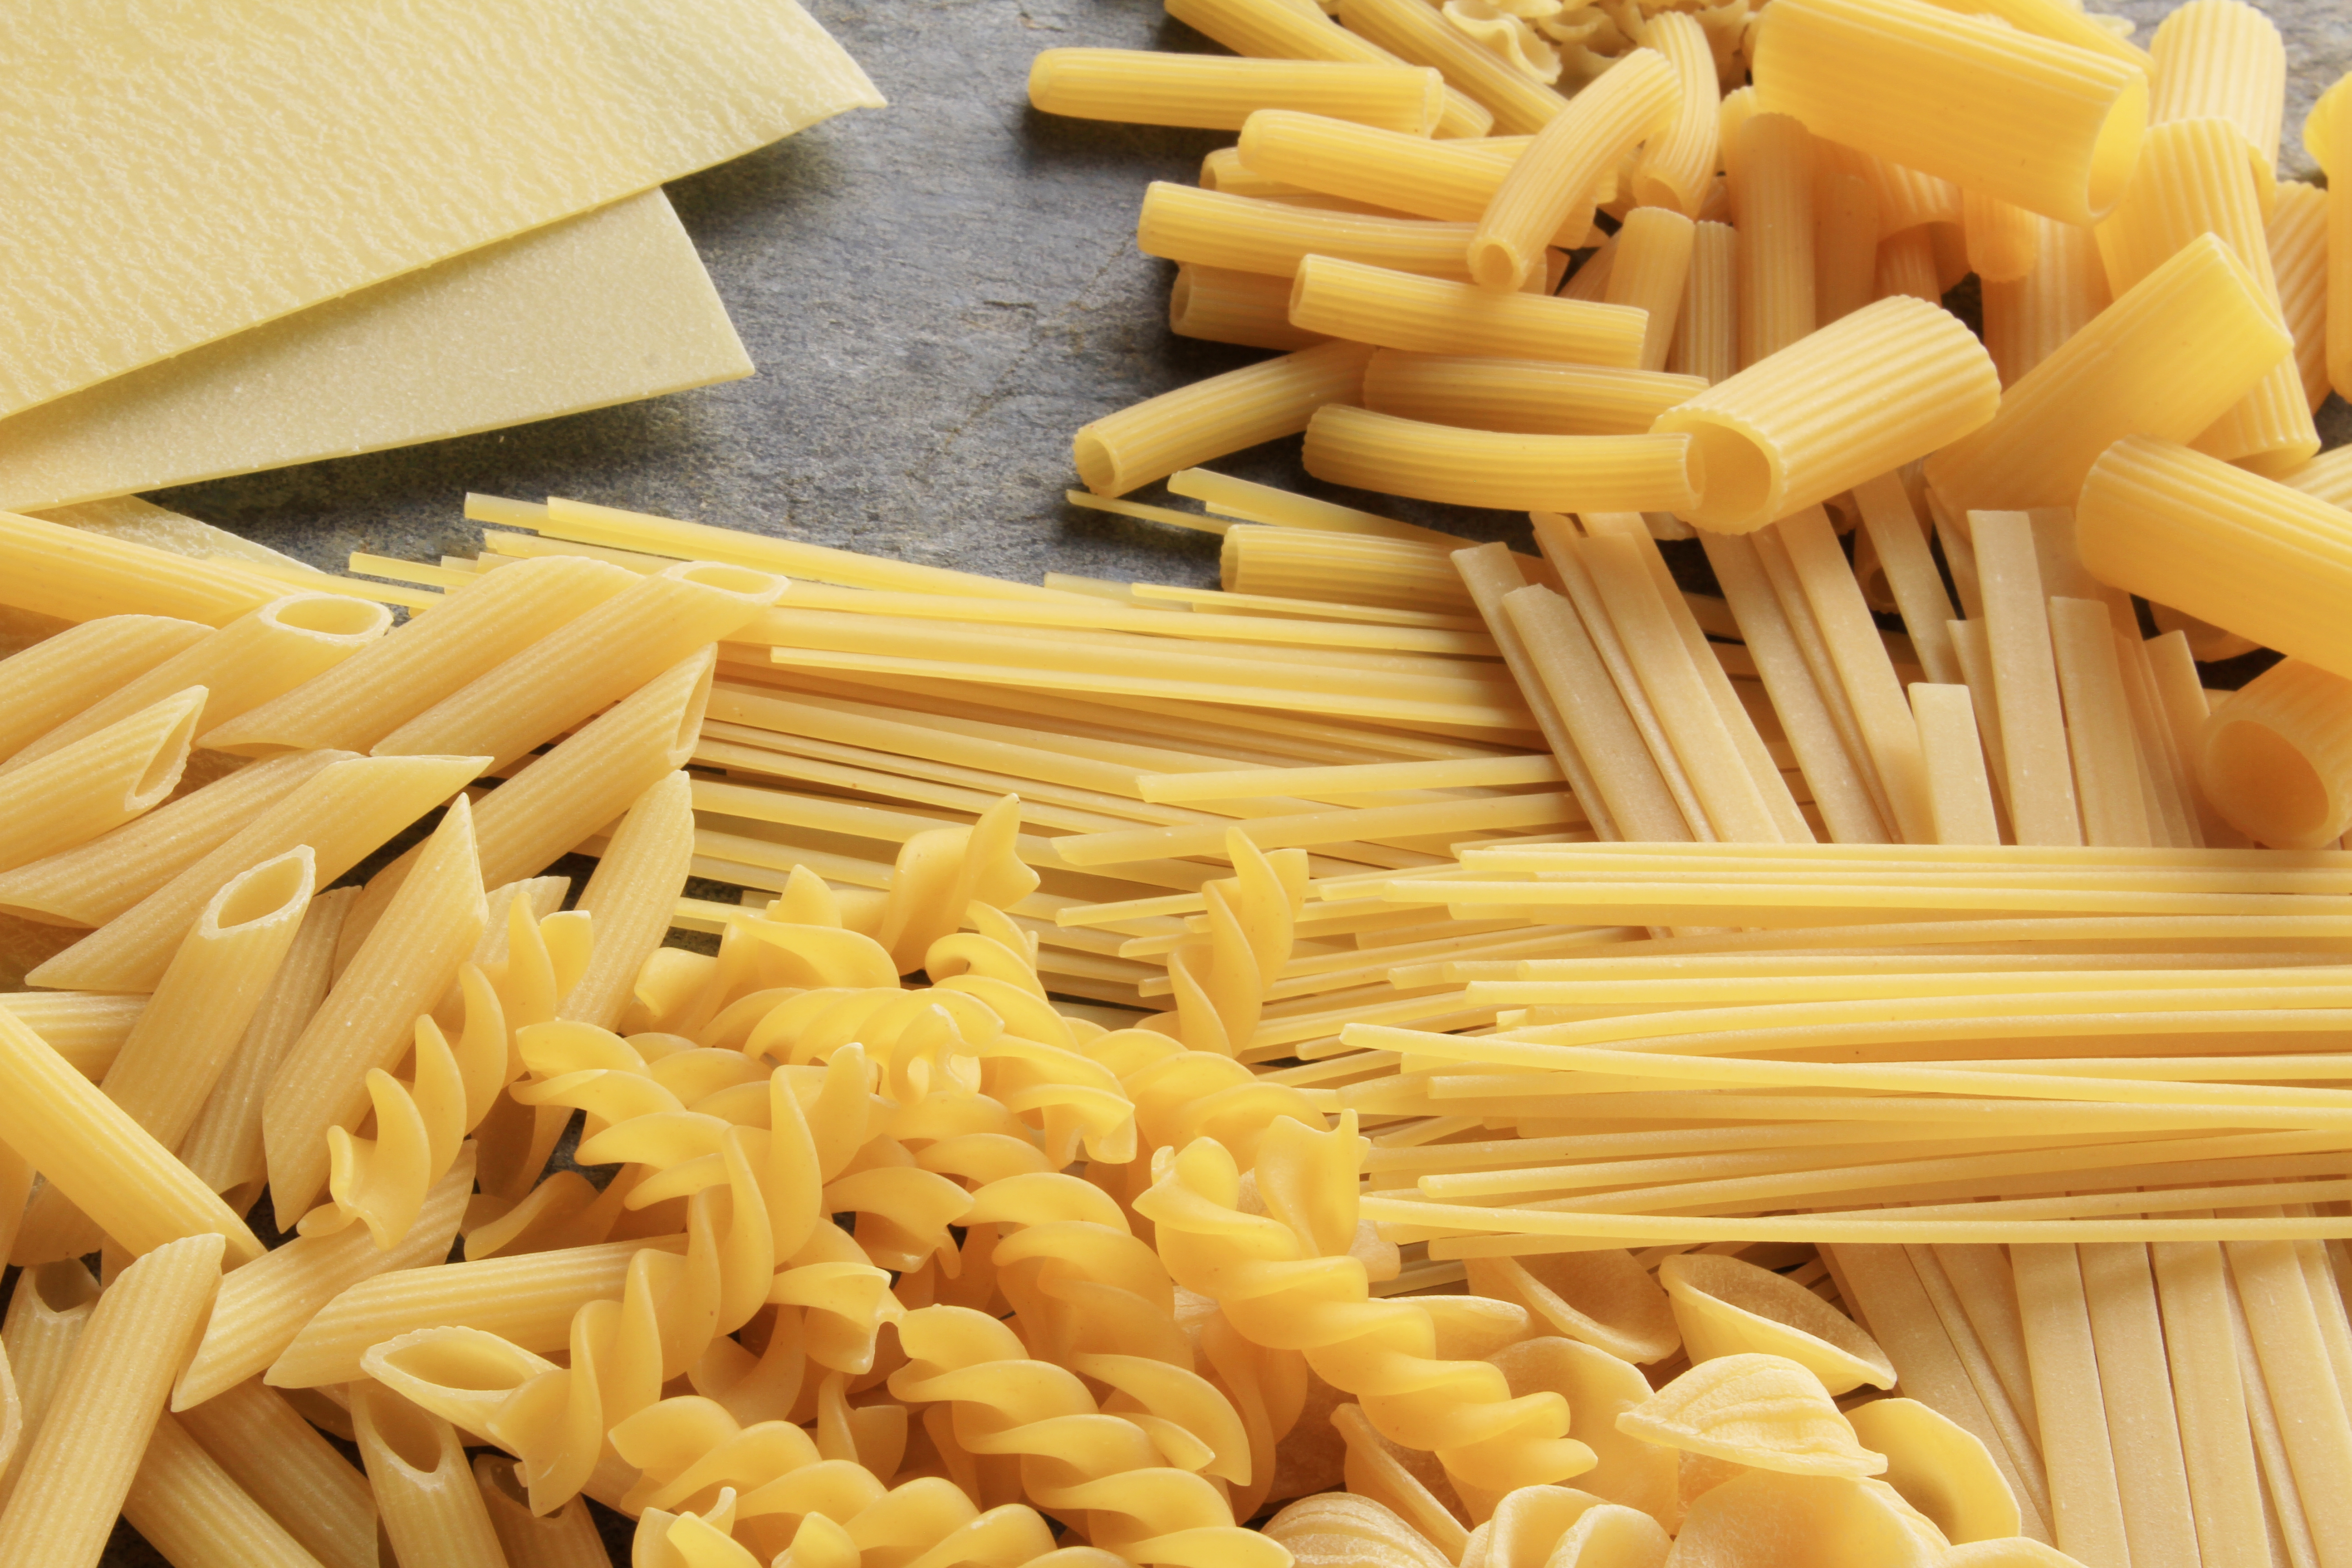 The End of Pasta?